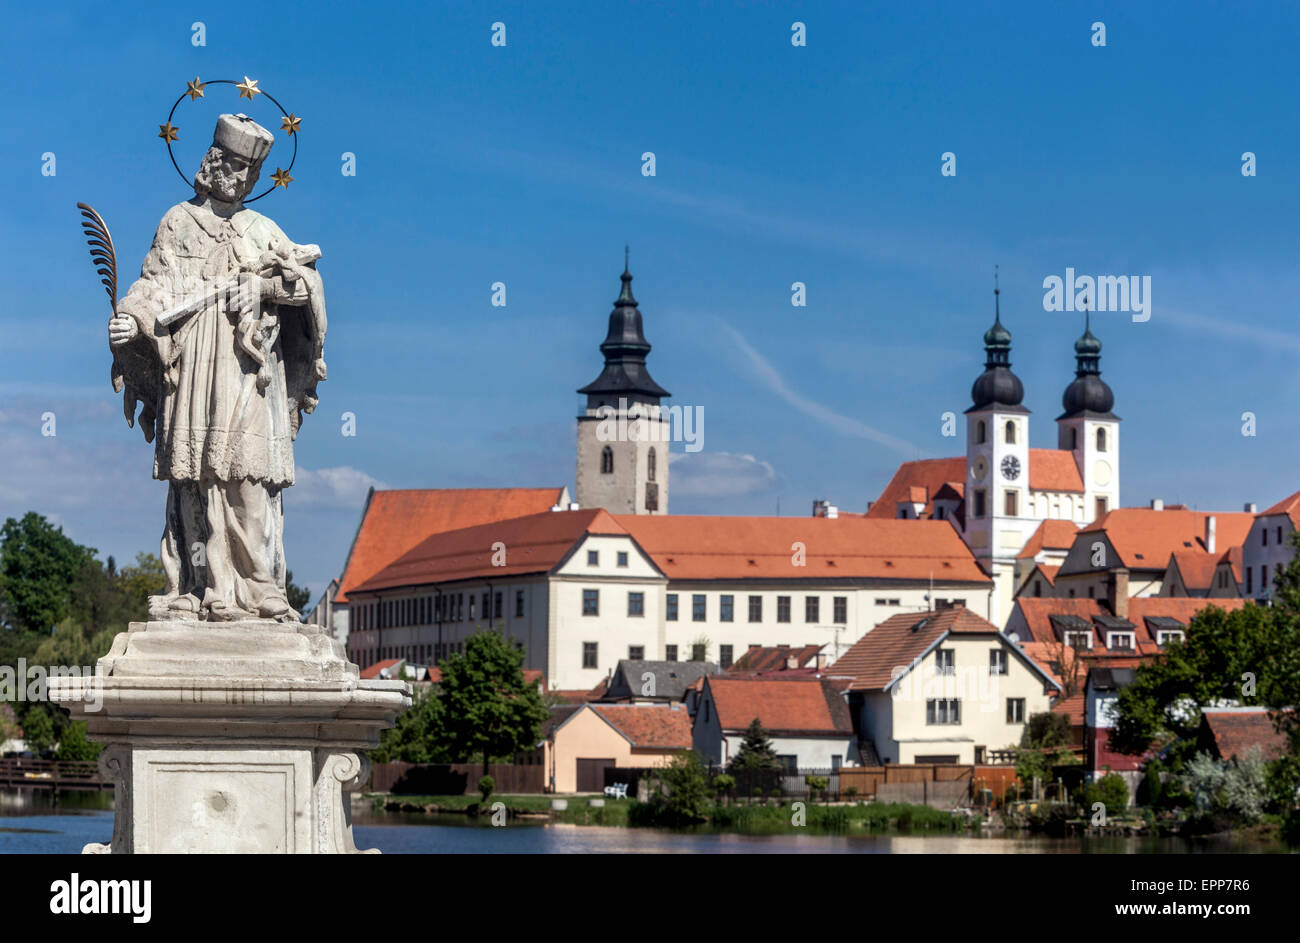 Telc Czech Republic Europe World heritage site Czech town baroque statue of St John of Nepomuk in foreground Stock Photo